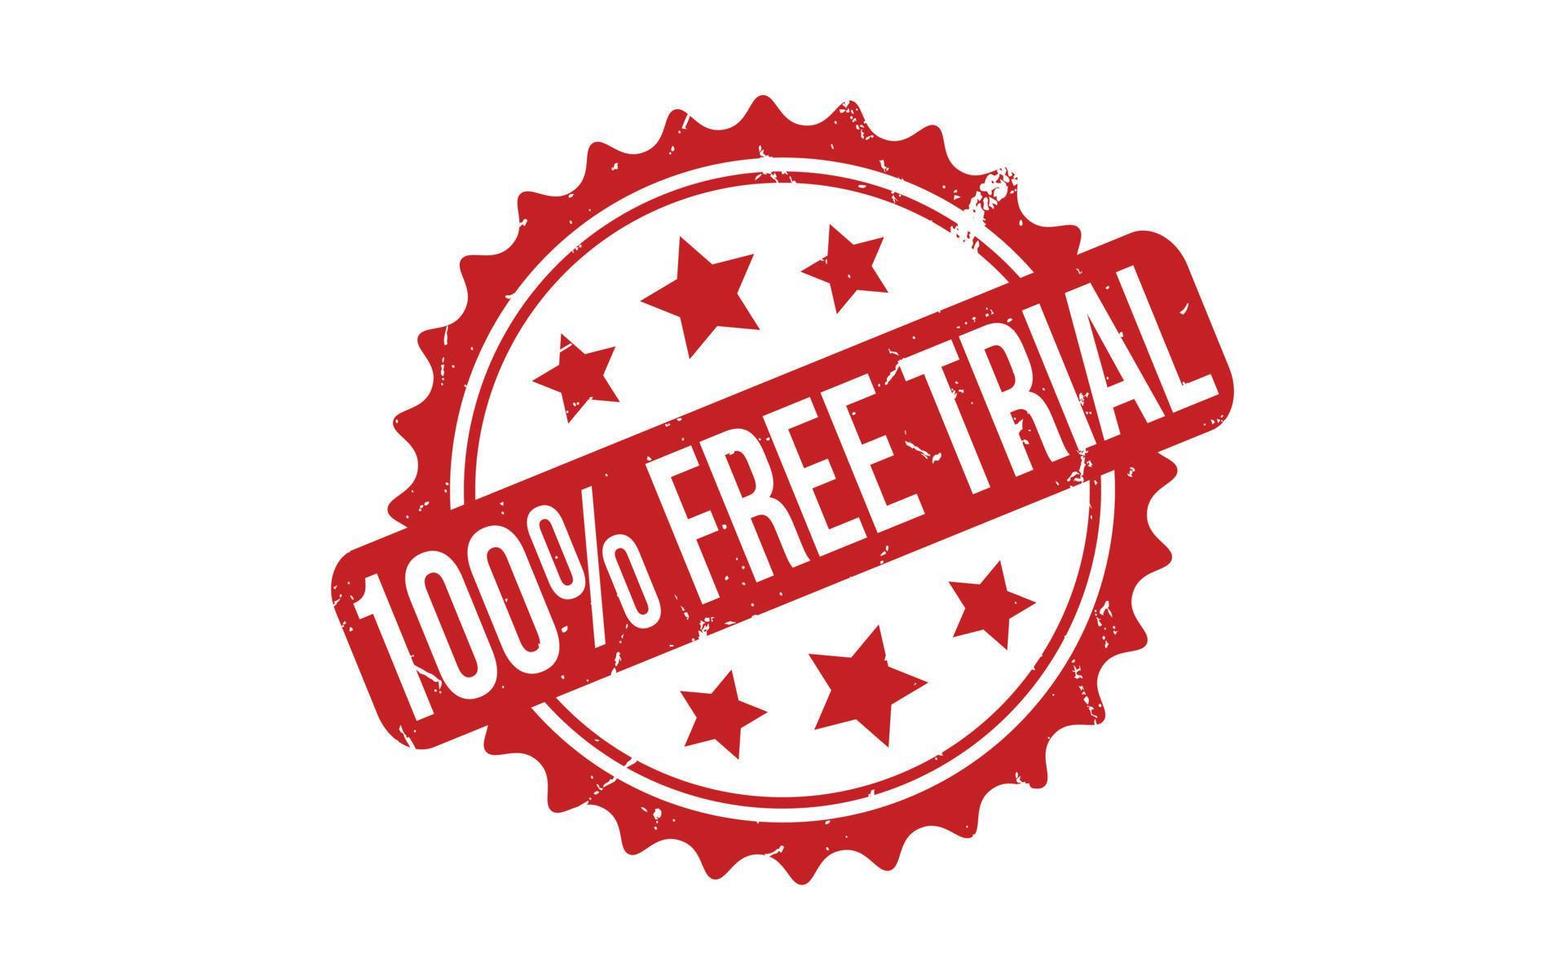 100 Percent Free Trial Rubber Stamp Seal Vector